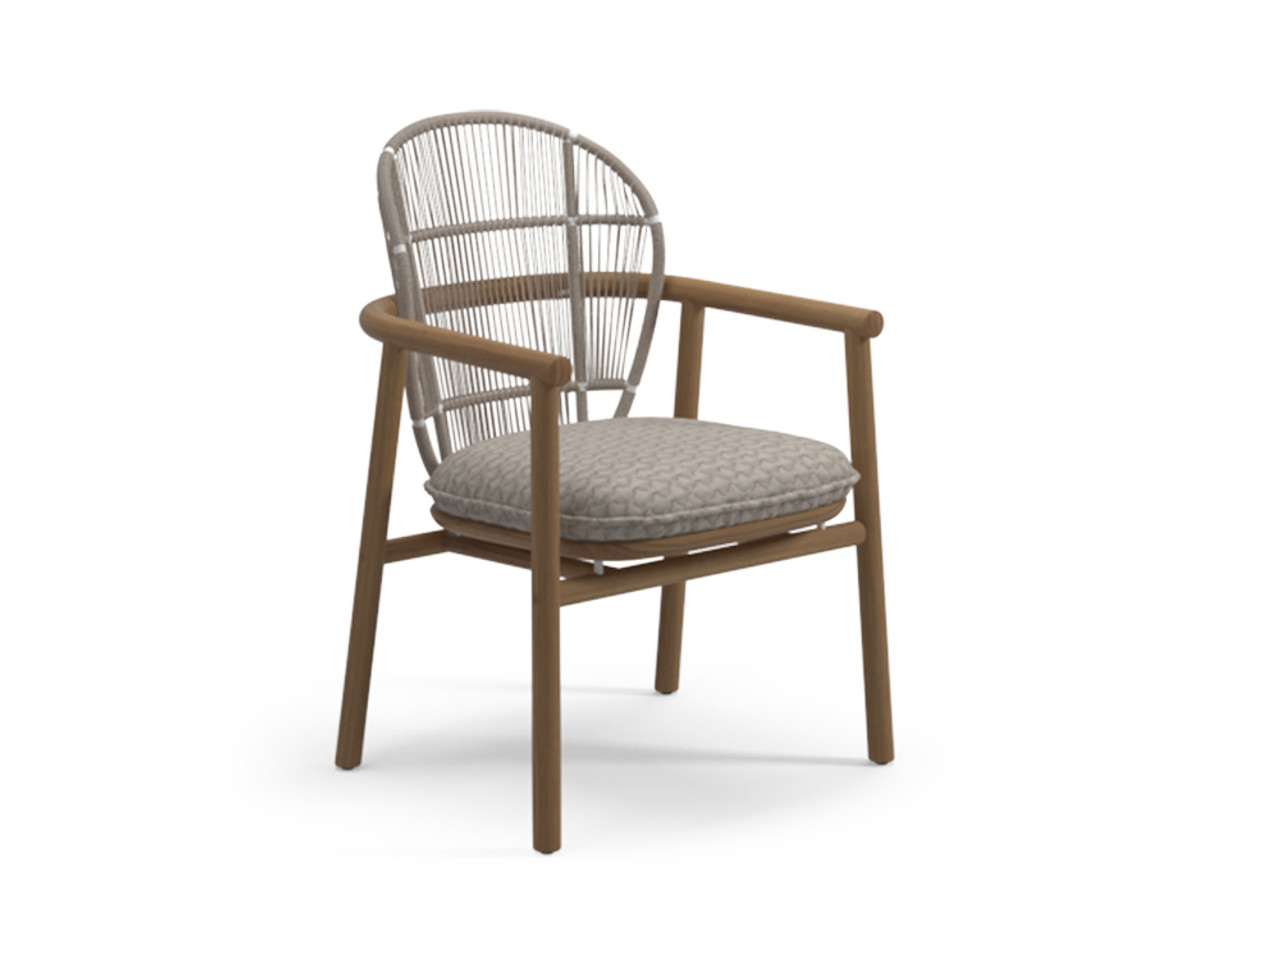 Fern Outdoor Dining Chair with Arms